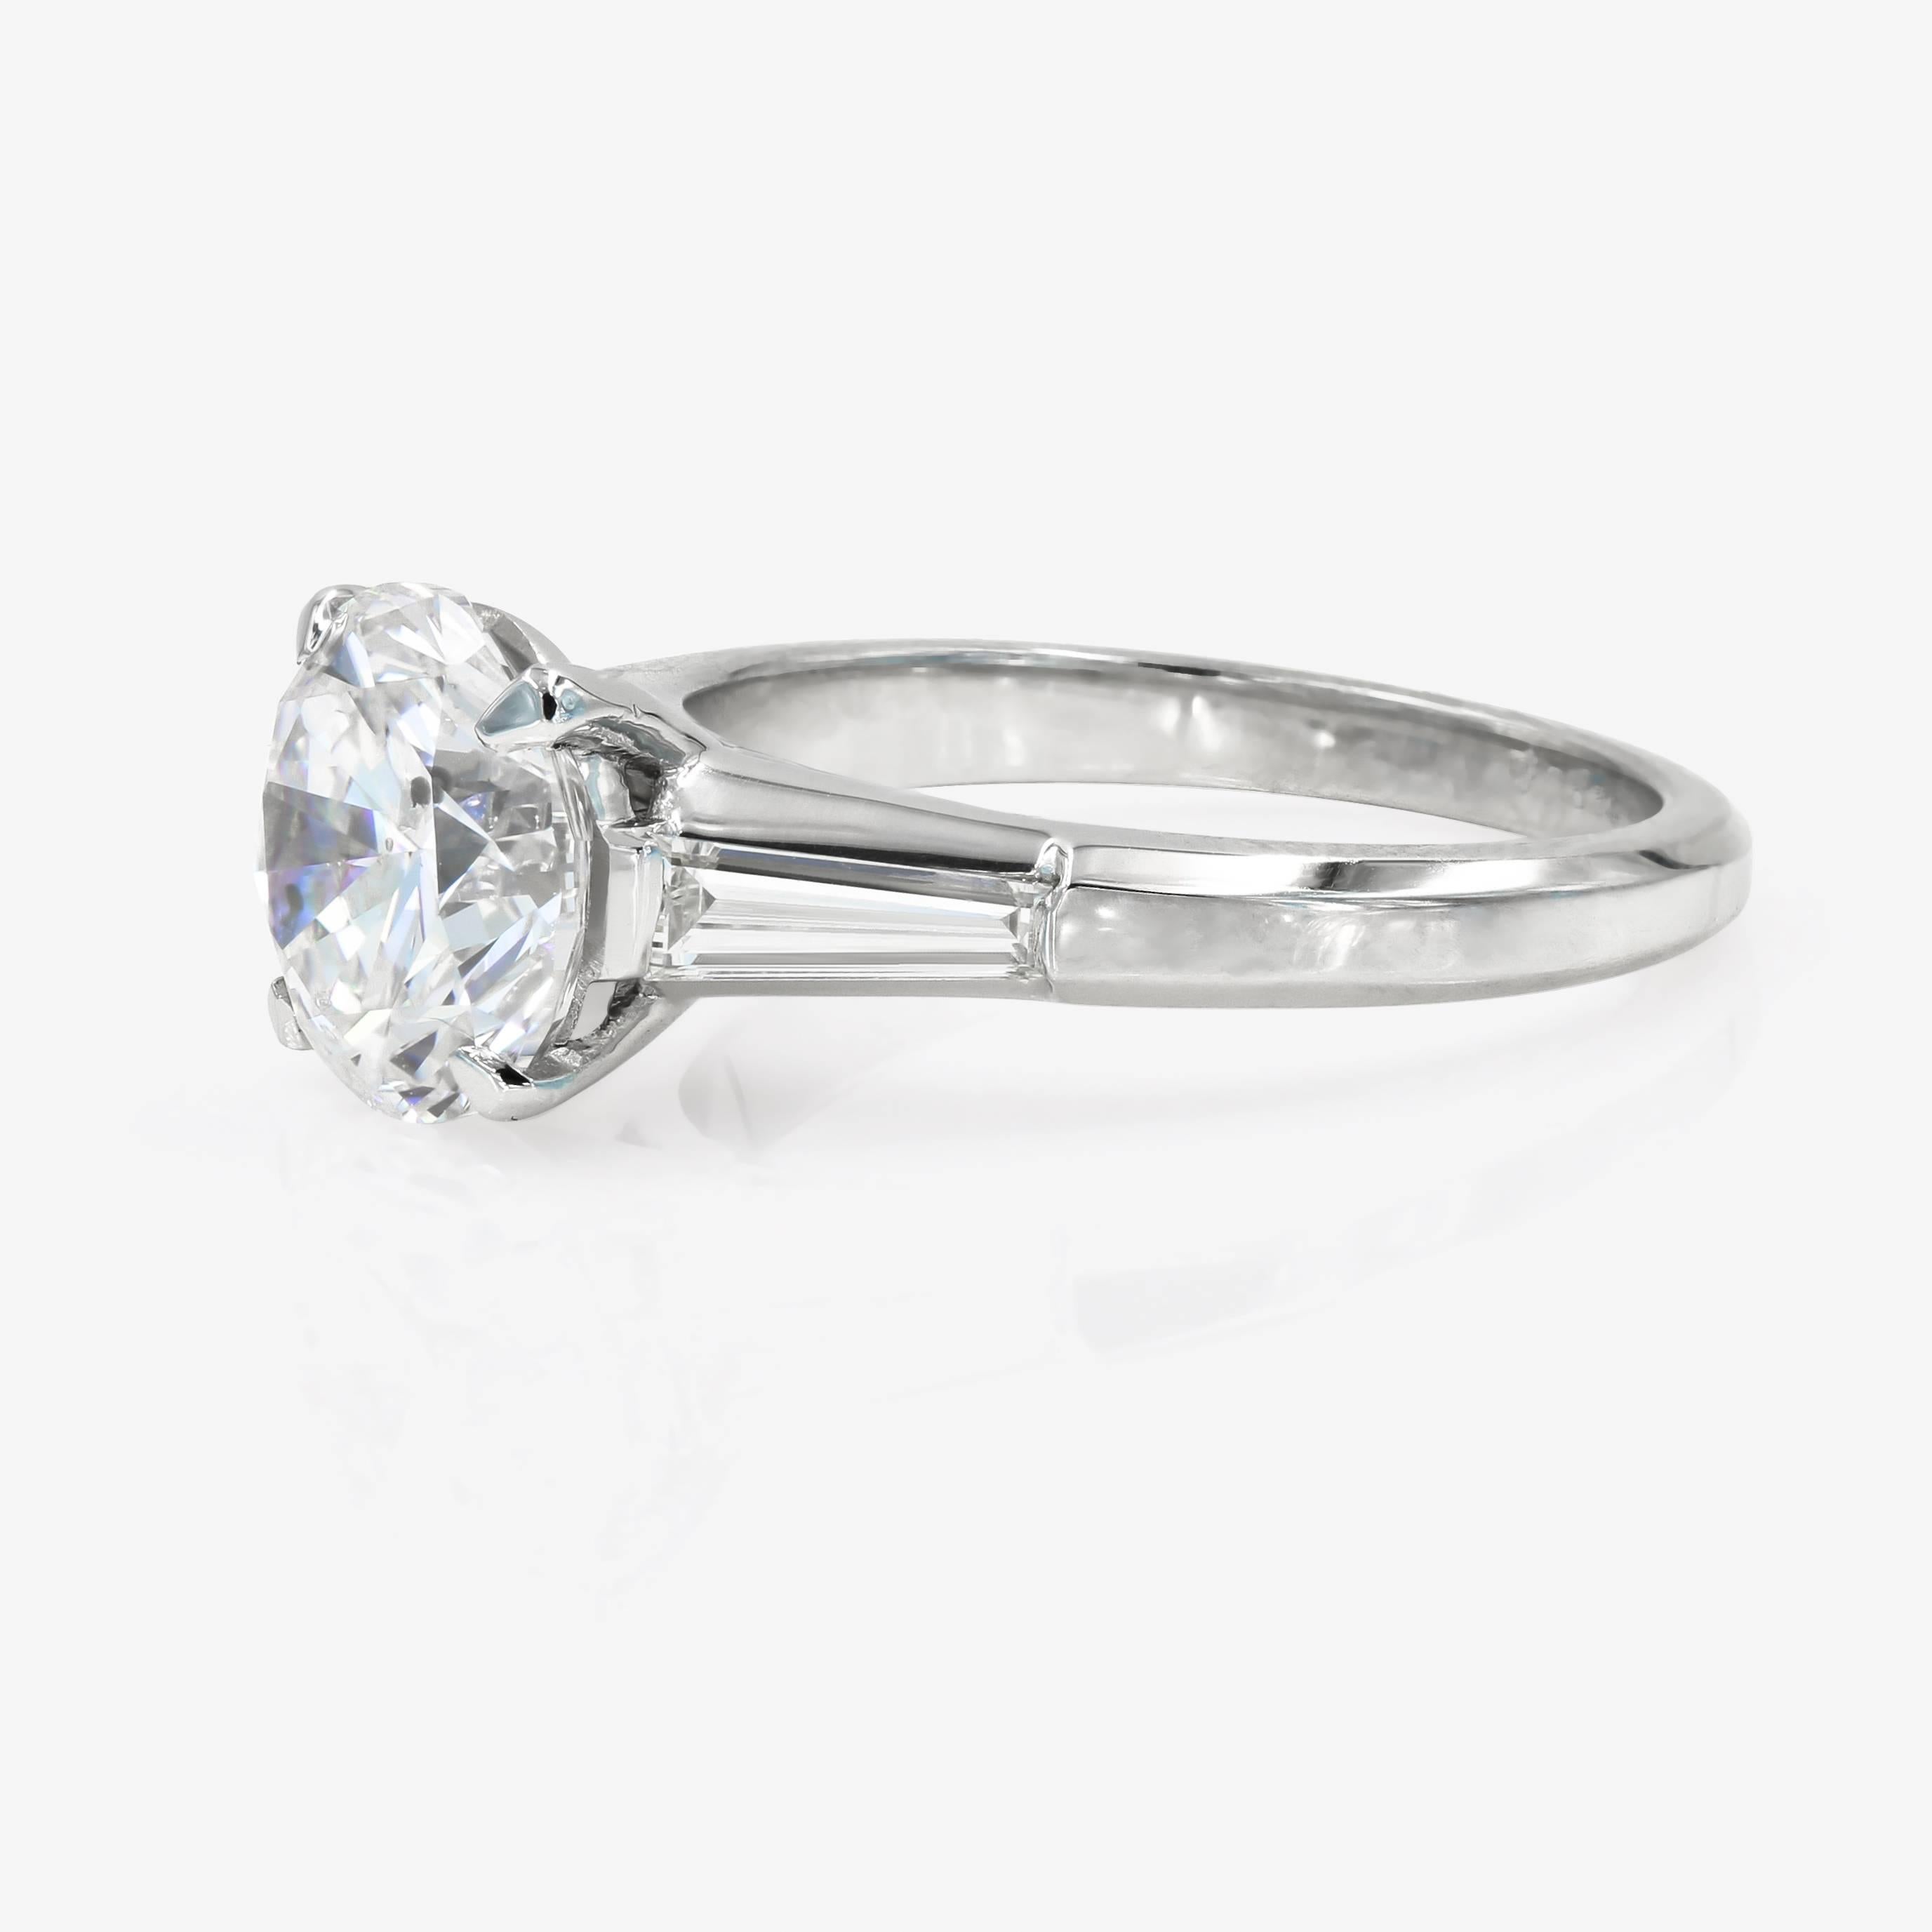 Round Cut GIA Certified 3.03cts. Round Diamond set in a Lester Lampert Signature Mounting